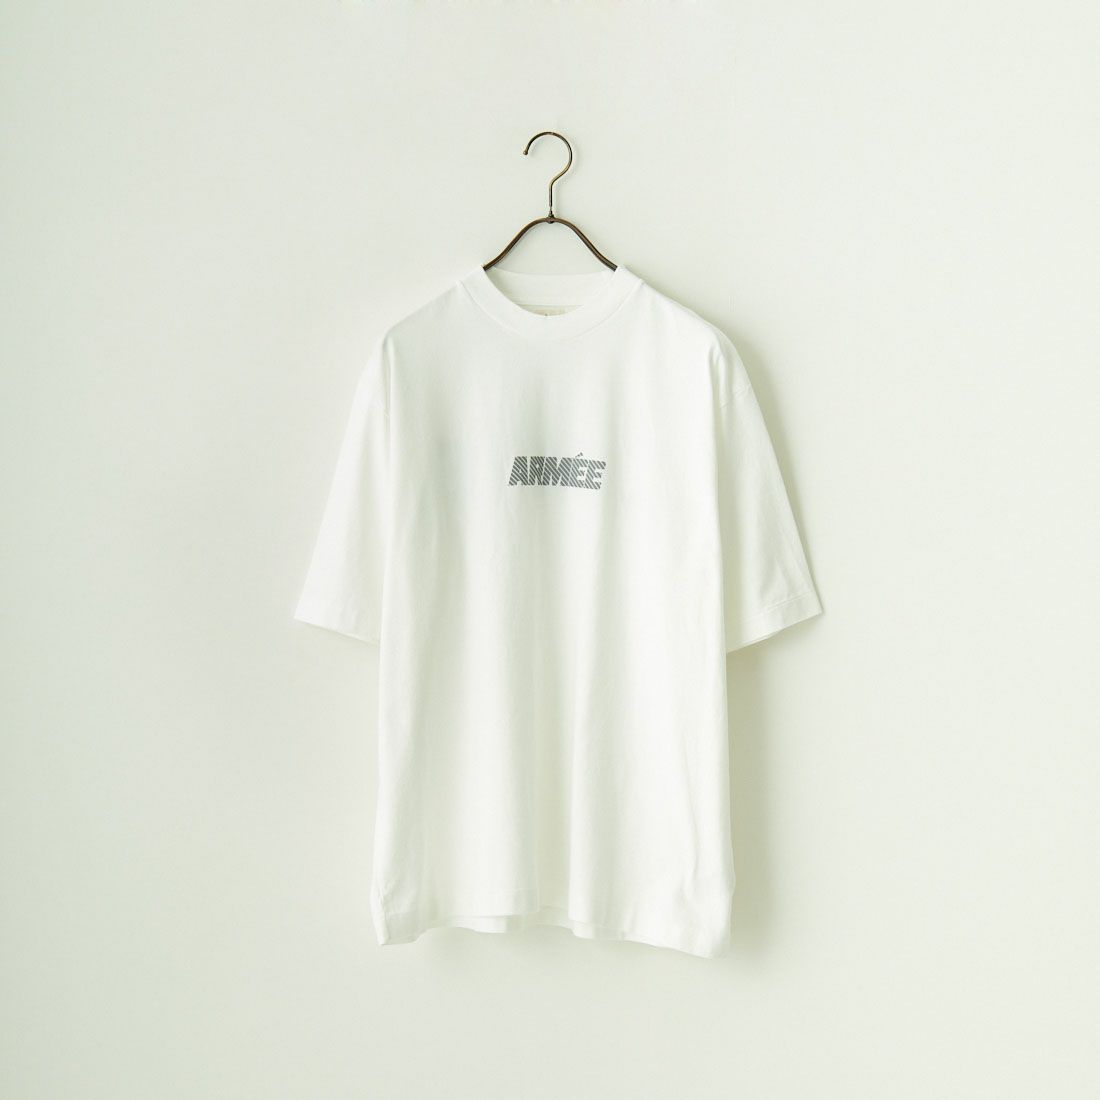 blurhms ROOTSTOCK [ブラームス ルーツストック] ワイド プリントTシャツ [BROOTS24S34C] 03 WHT/GRY